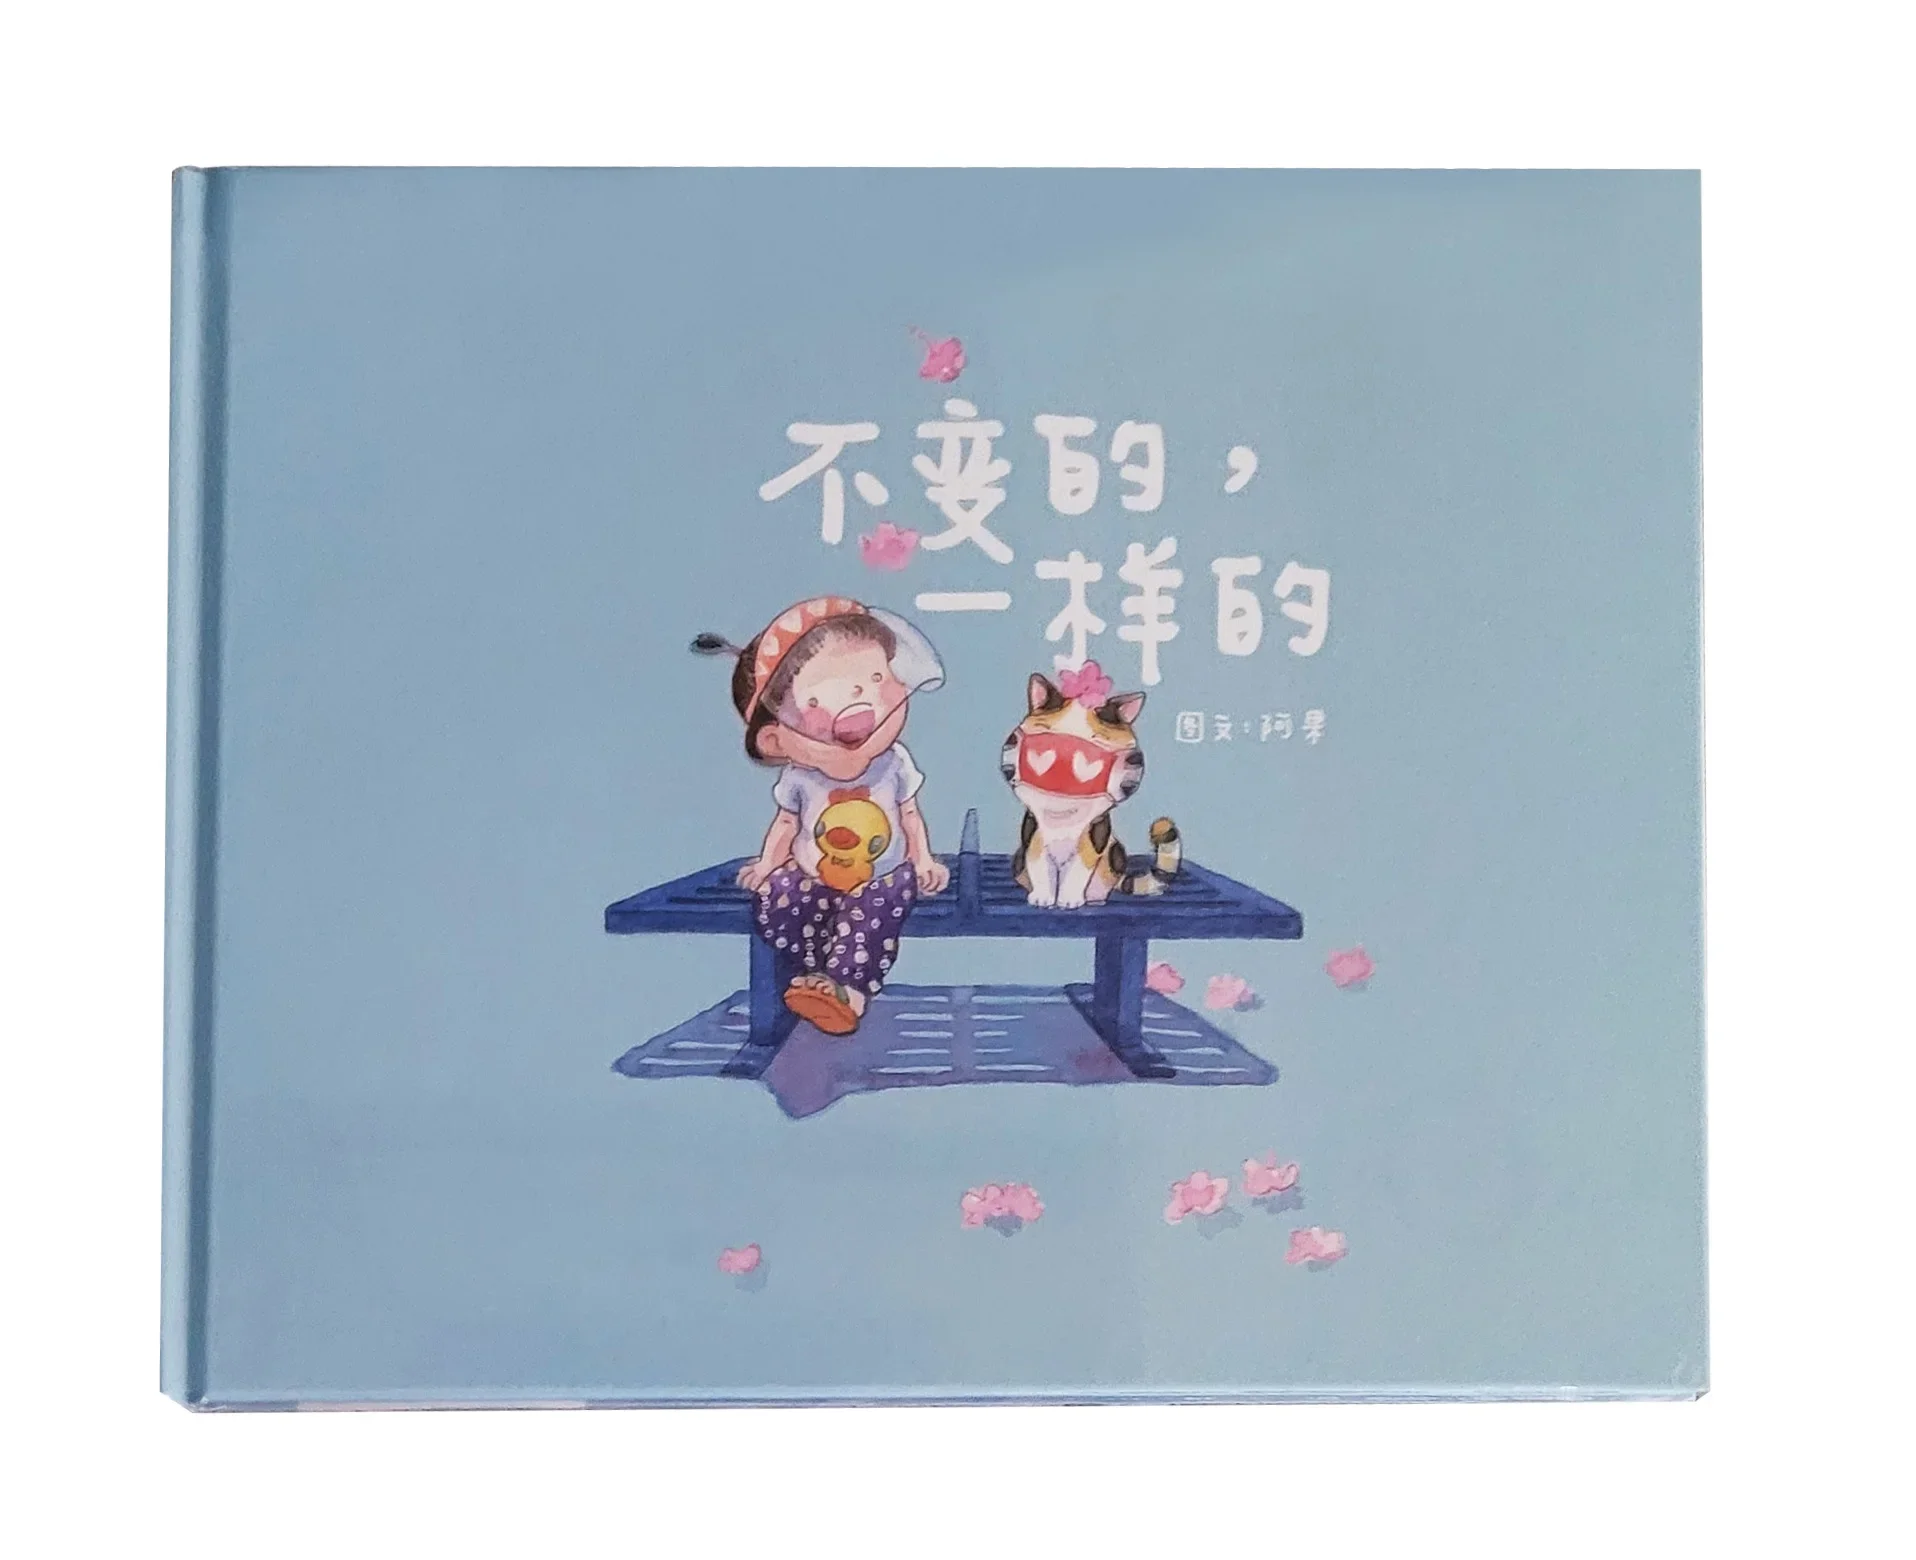 AH GUO 'EVERYTHING‘S FINE' ILLUSTRATION BOOK - CHINESE